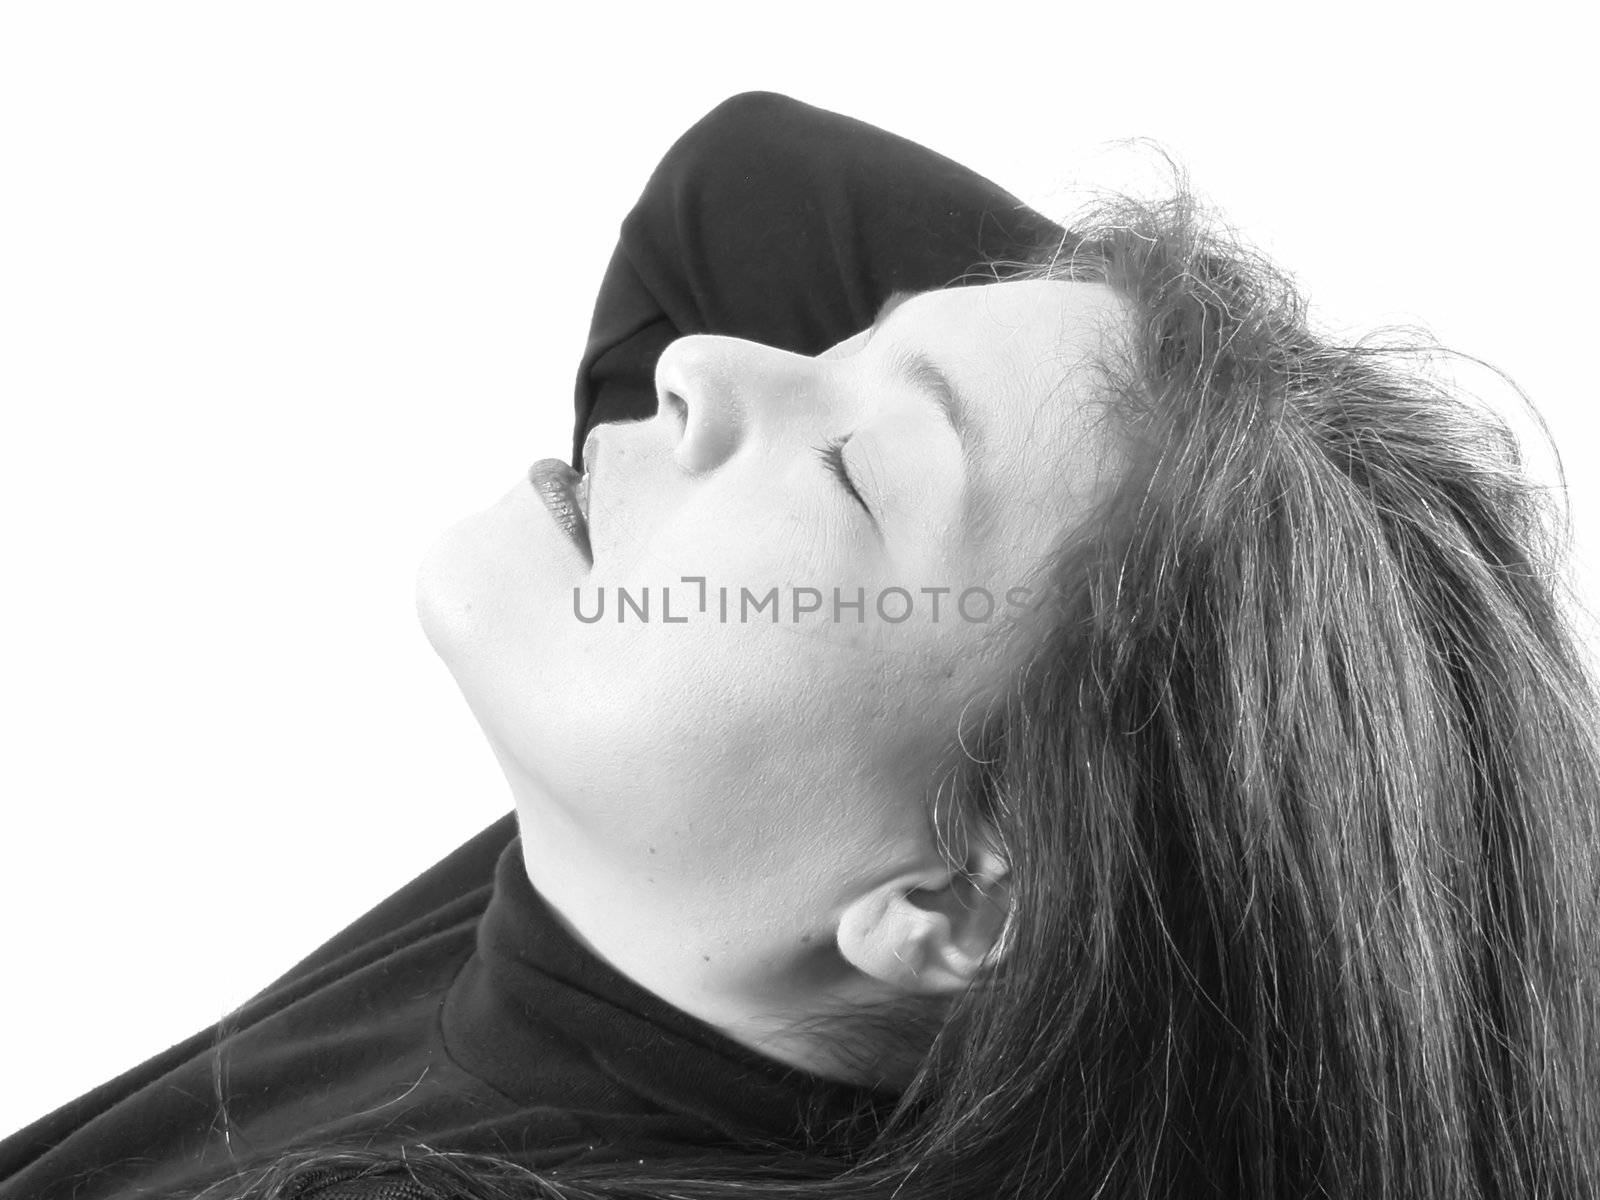 A brunette woman closes her eyes and leans her head back. On a white background, in black and white.